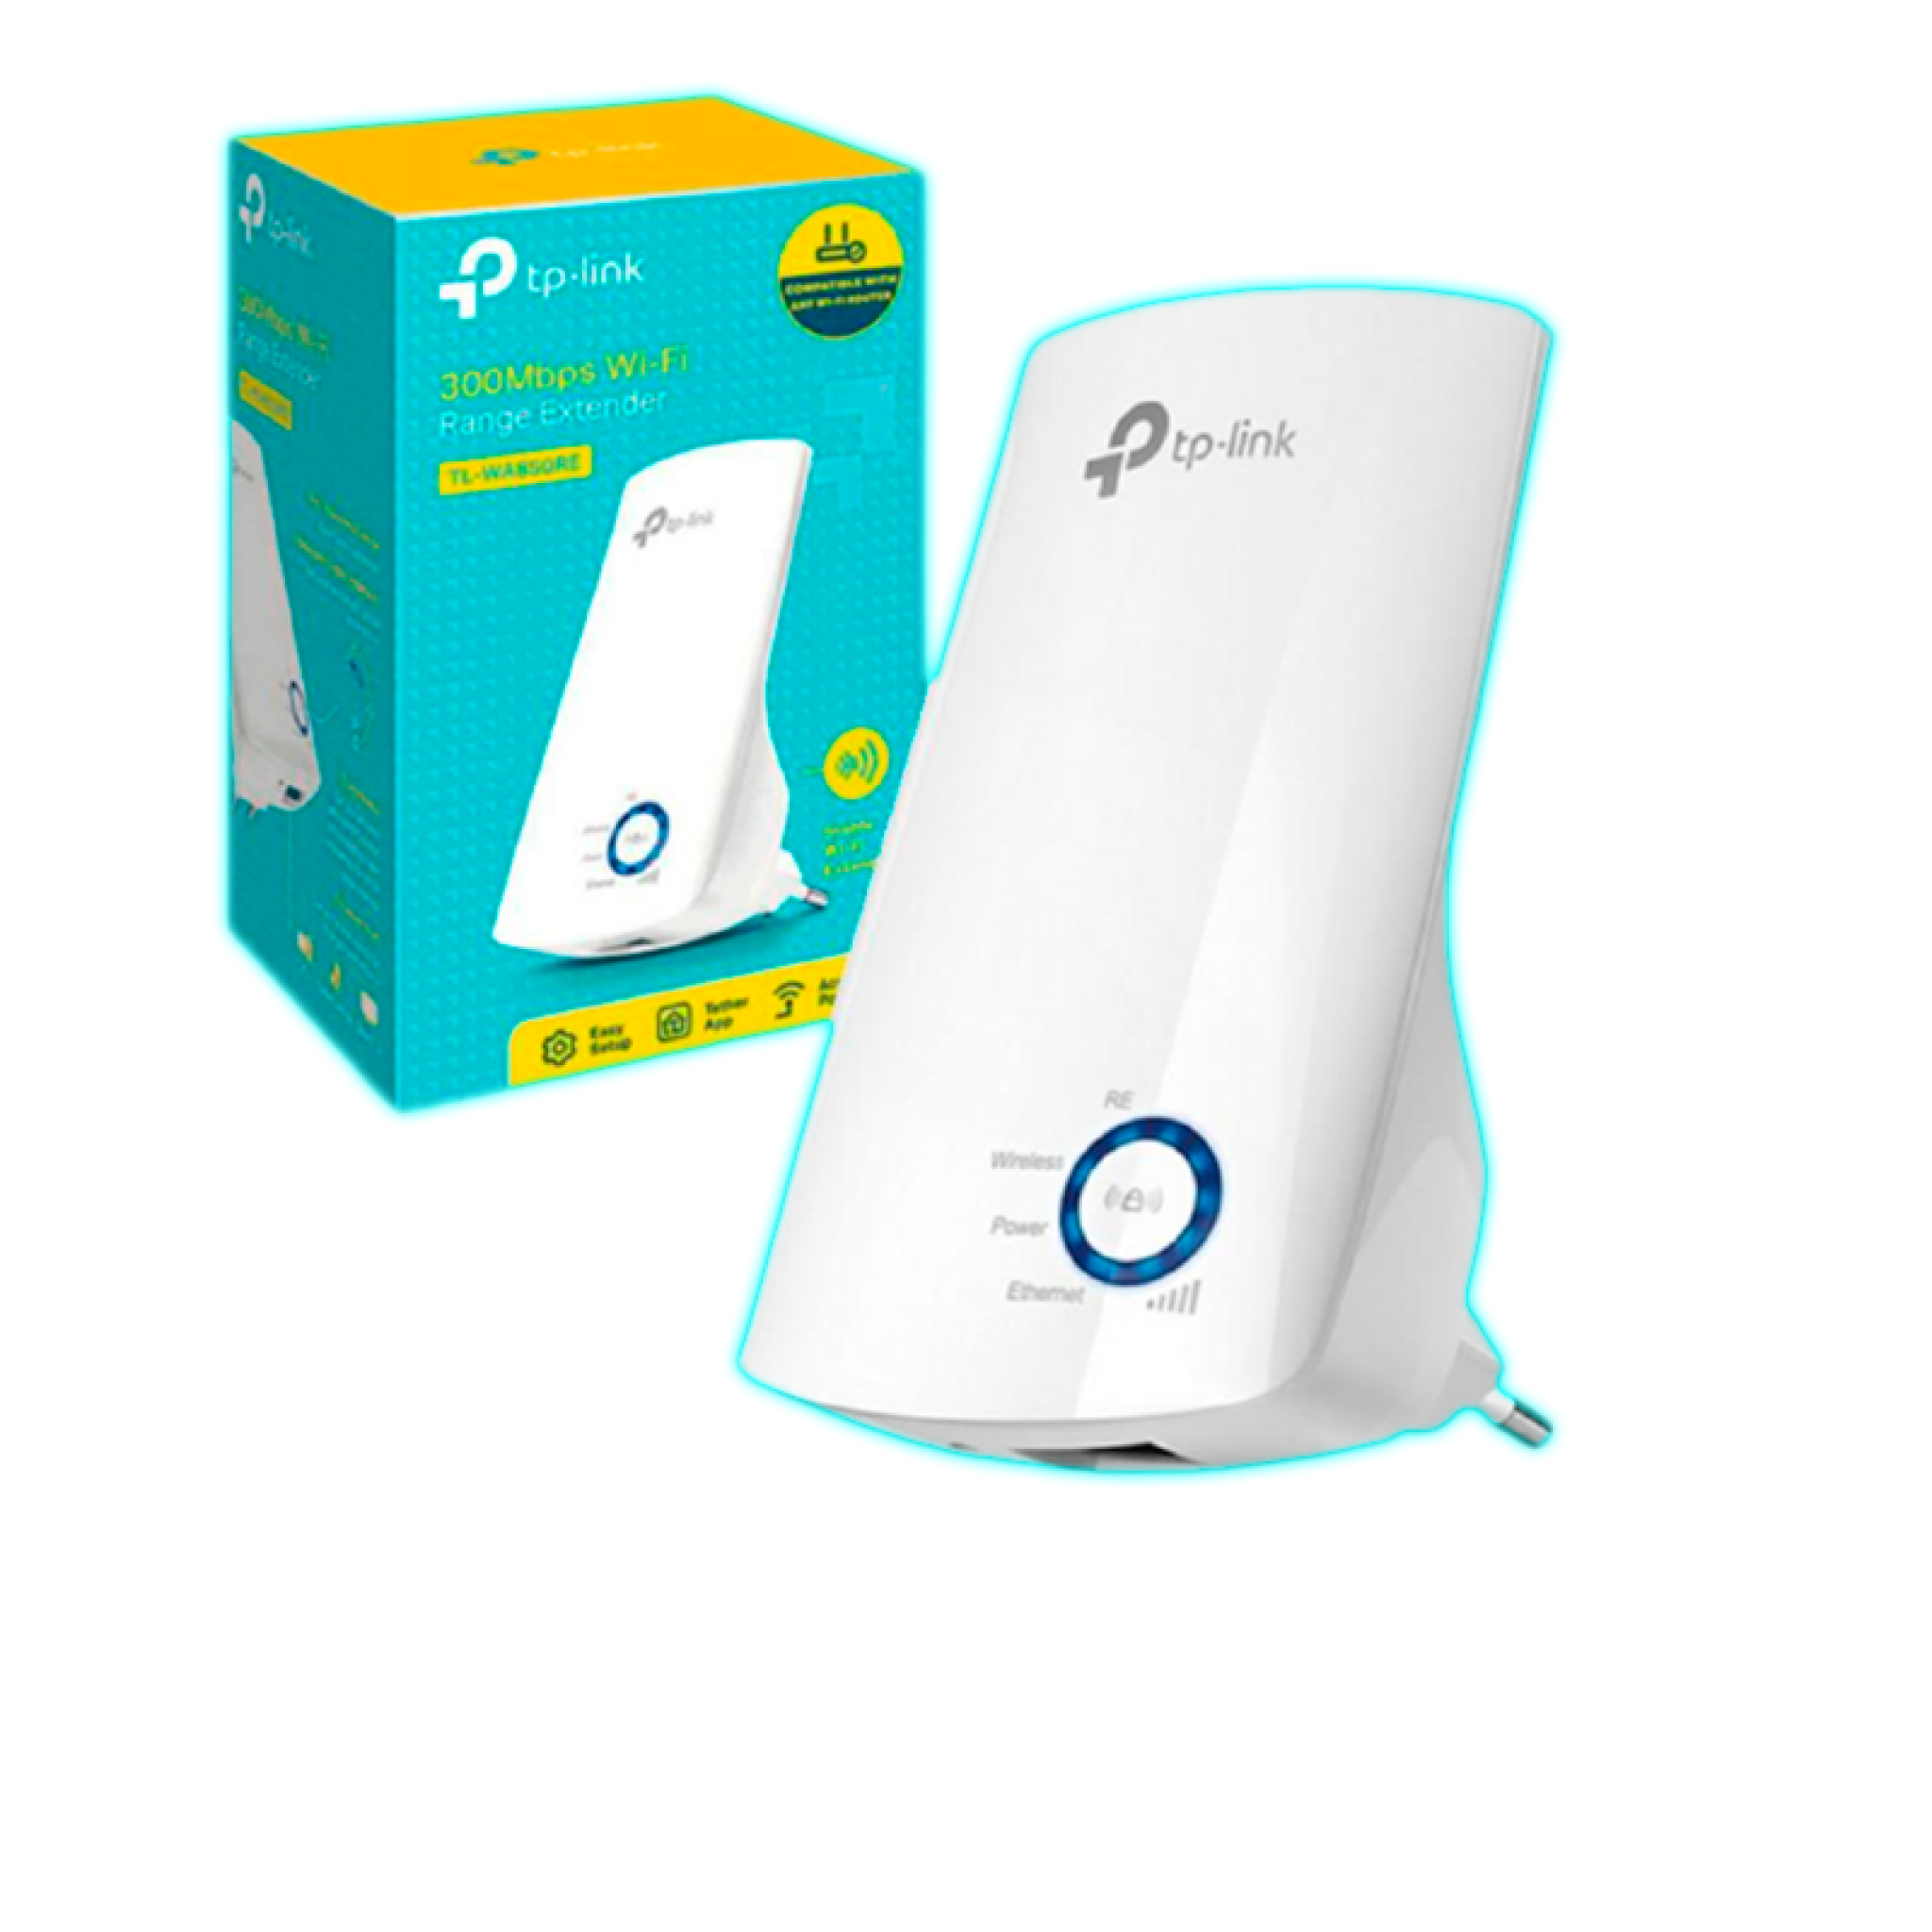 REPETIDOR WIFI 300MBPS TP-LINK TL-WA850RE :: Serial Center